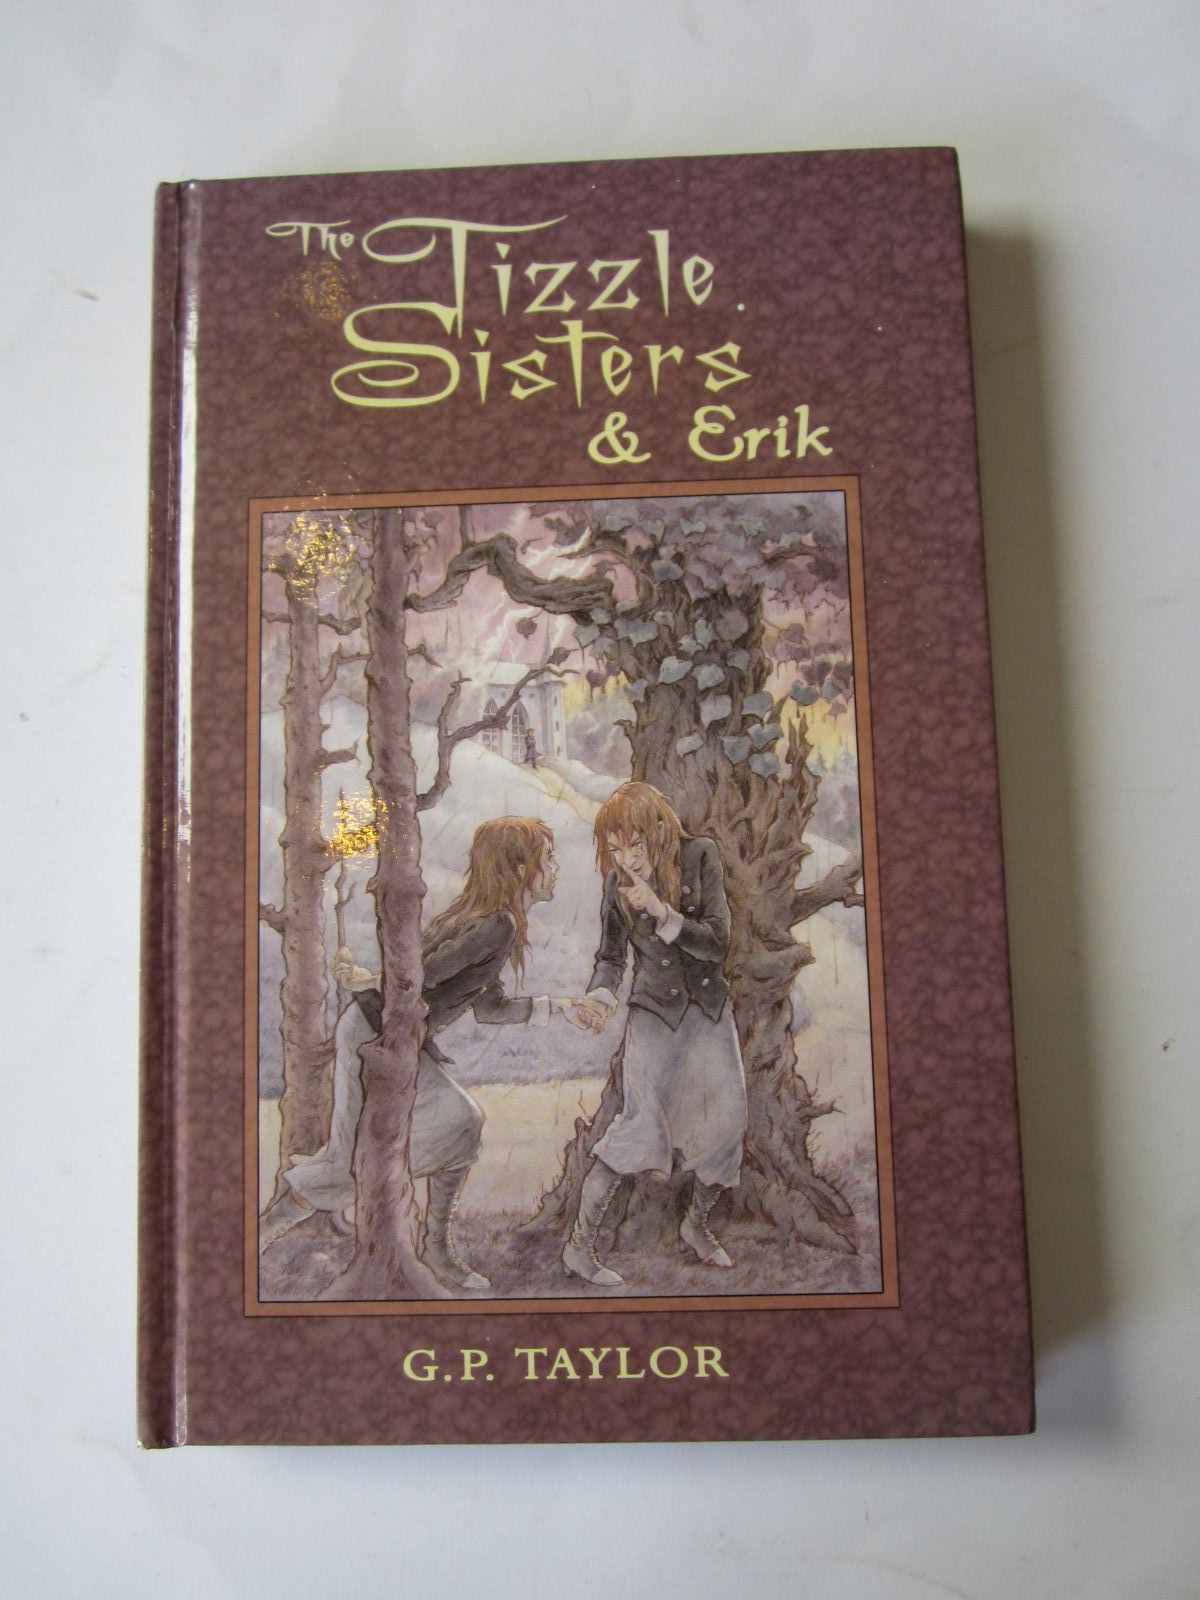 Cover of THE TIZZLE SISTERS & ERIK by G.P. Taylor